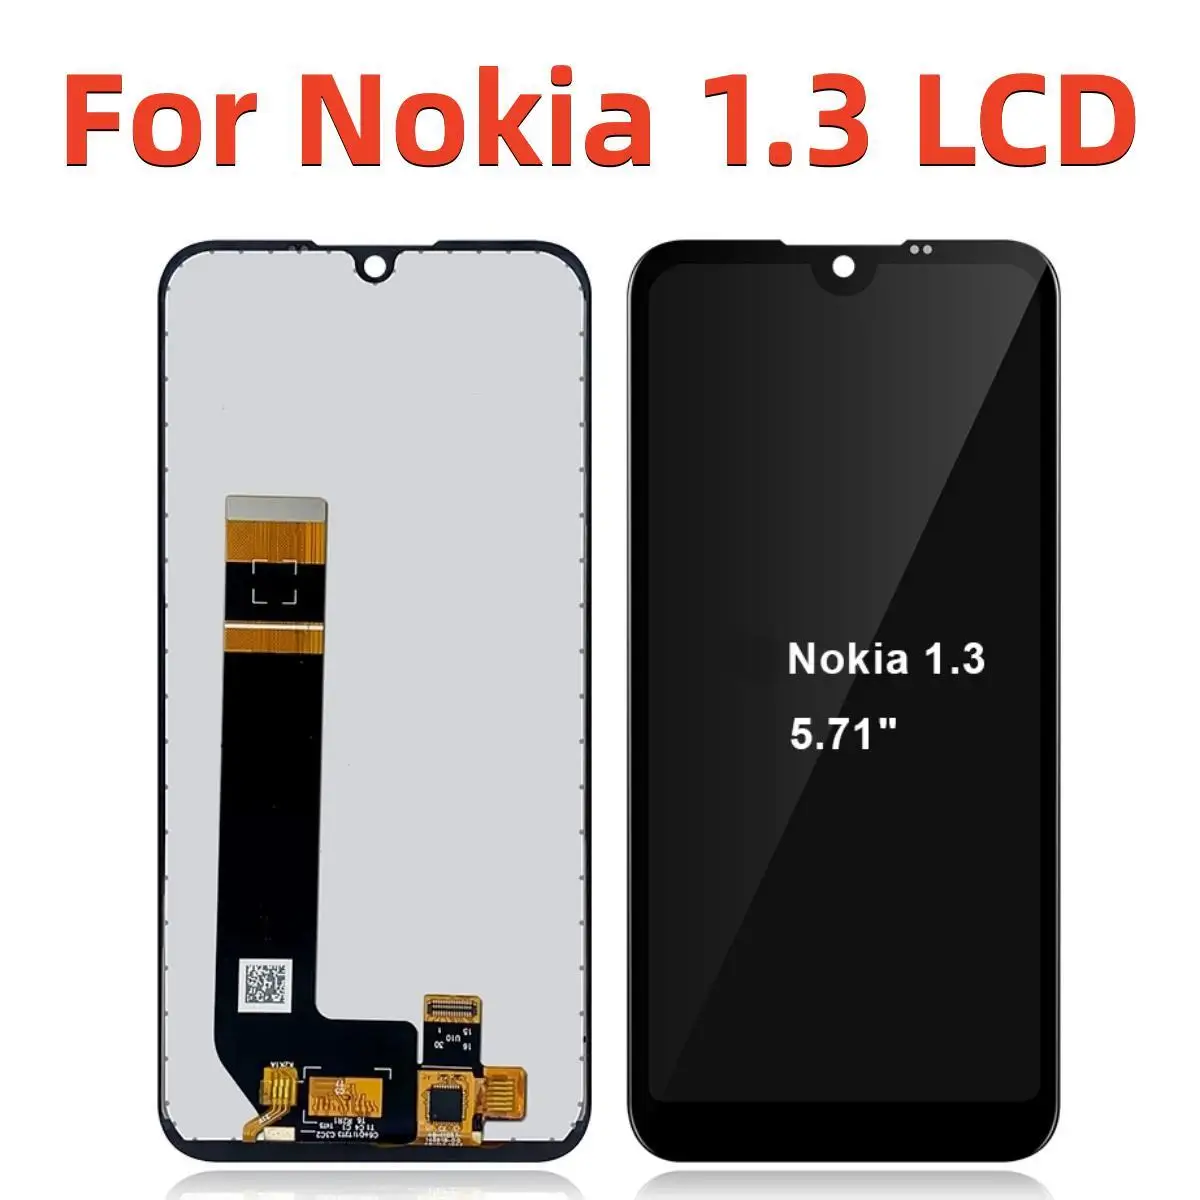 

100% Origina For Nokia 1.3 LCD Display Touch Screen Replacement Parts For Nokia 1.3 N1.3 TA-1216 TA-1205 Digitizer Assembly